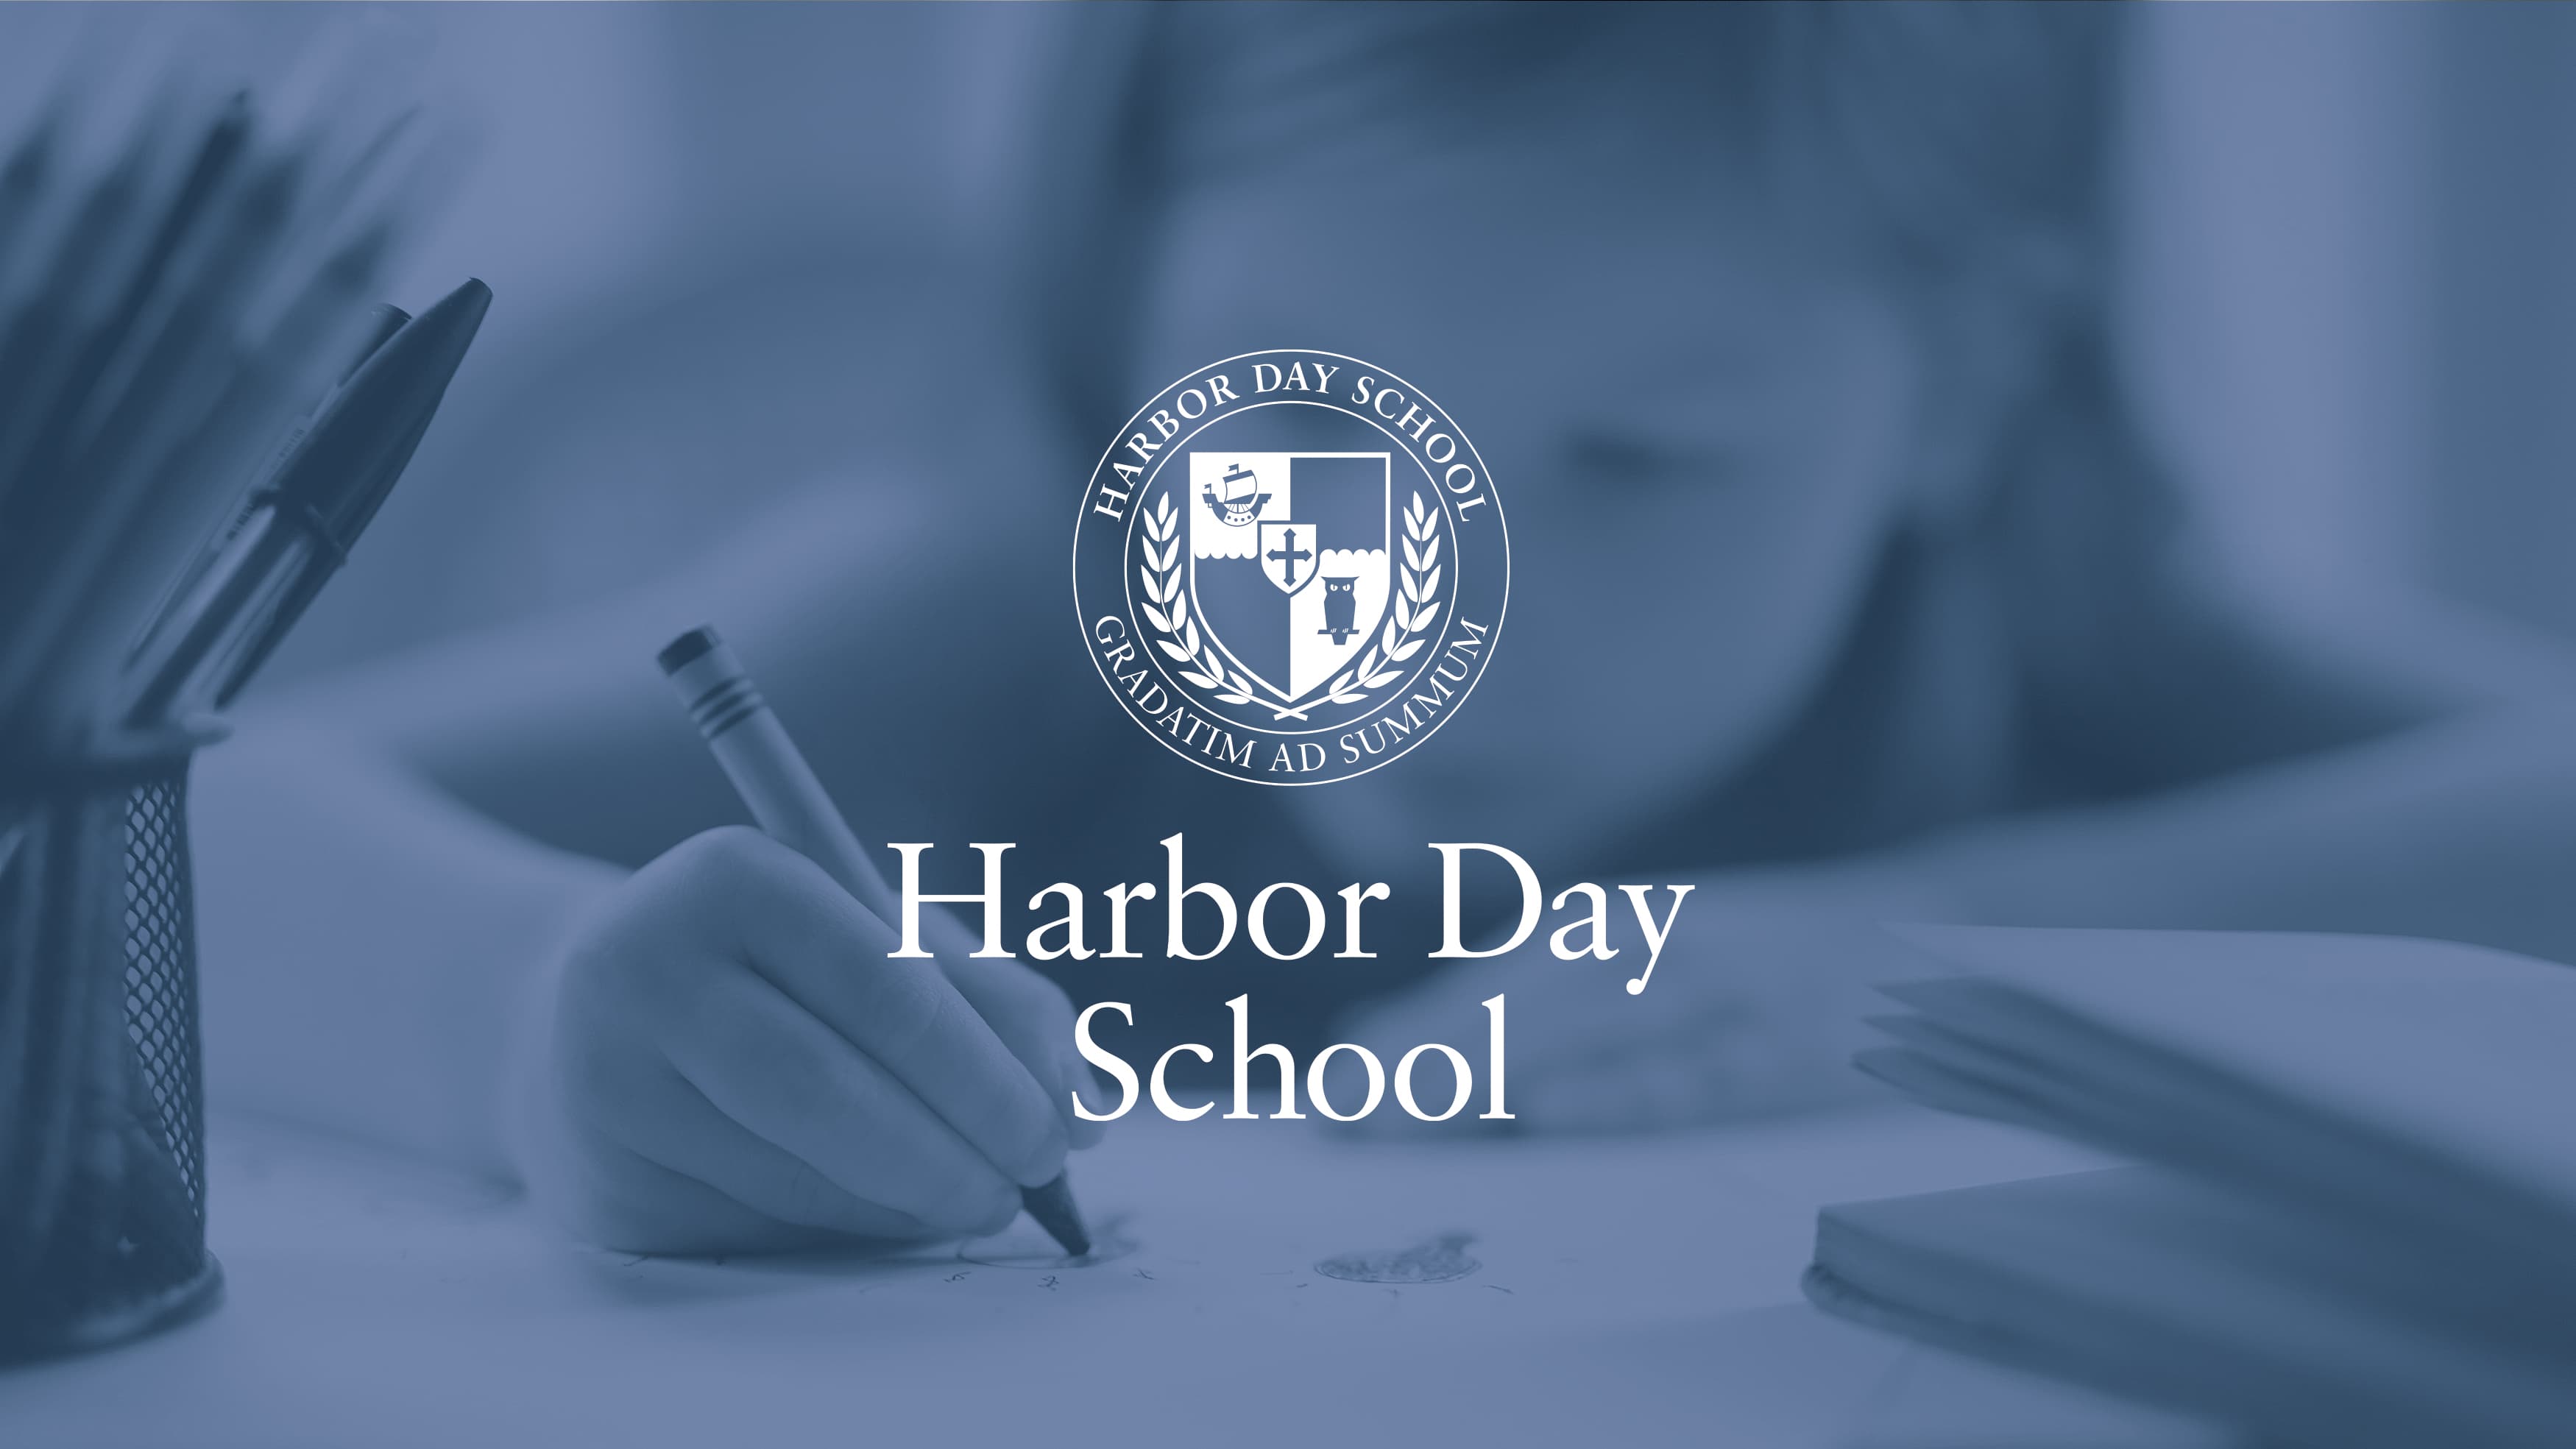 Harbor Day logo on an image of a young girl drawing at school.